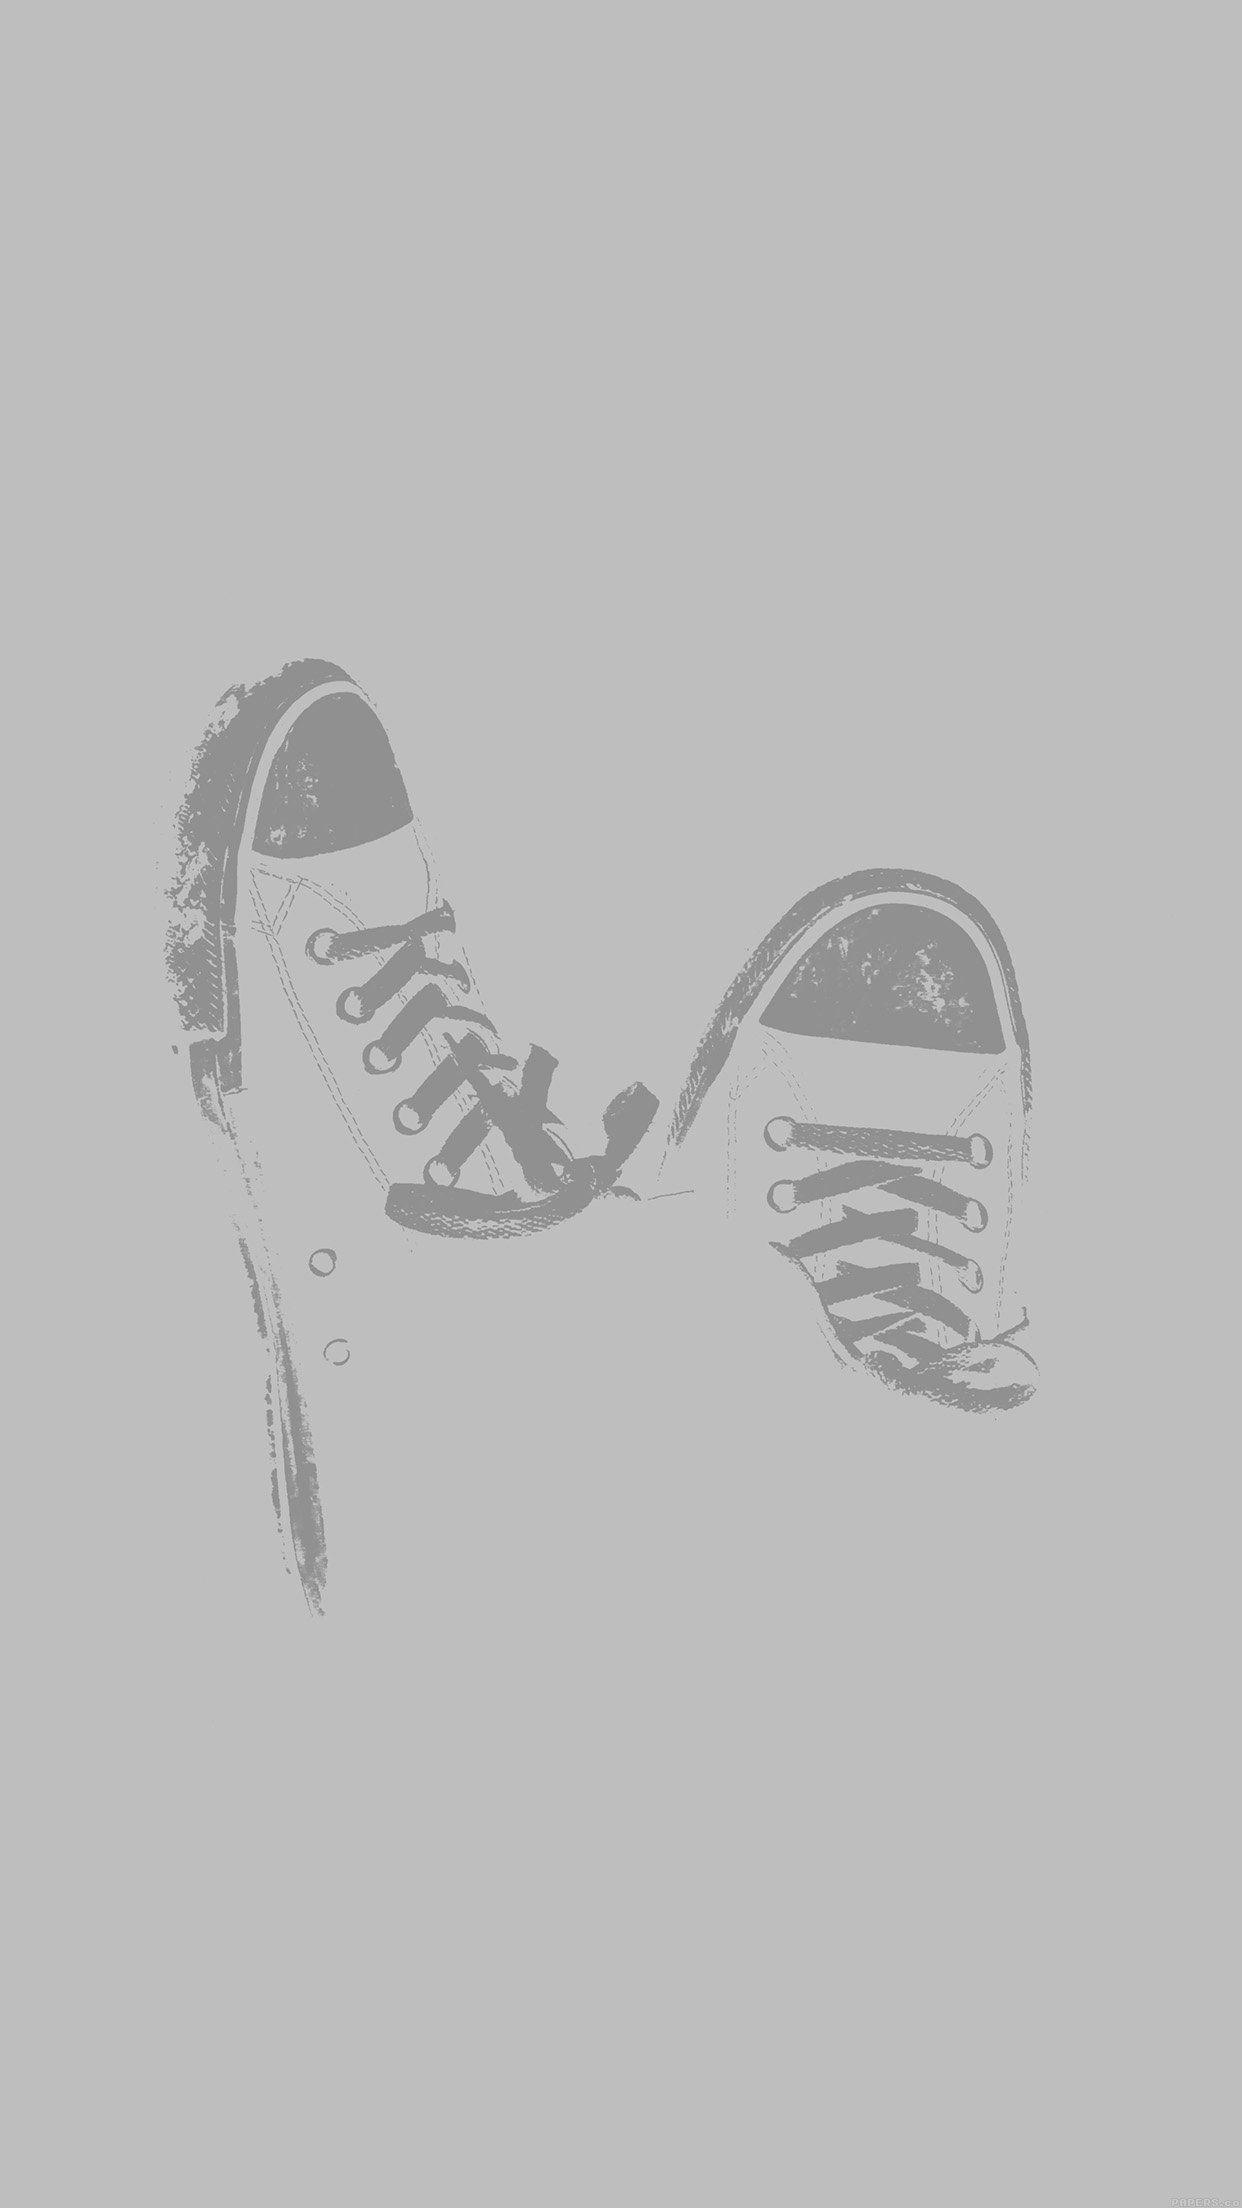 Converse Wallpapers For Iphone - Wallpaper Cave